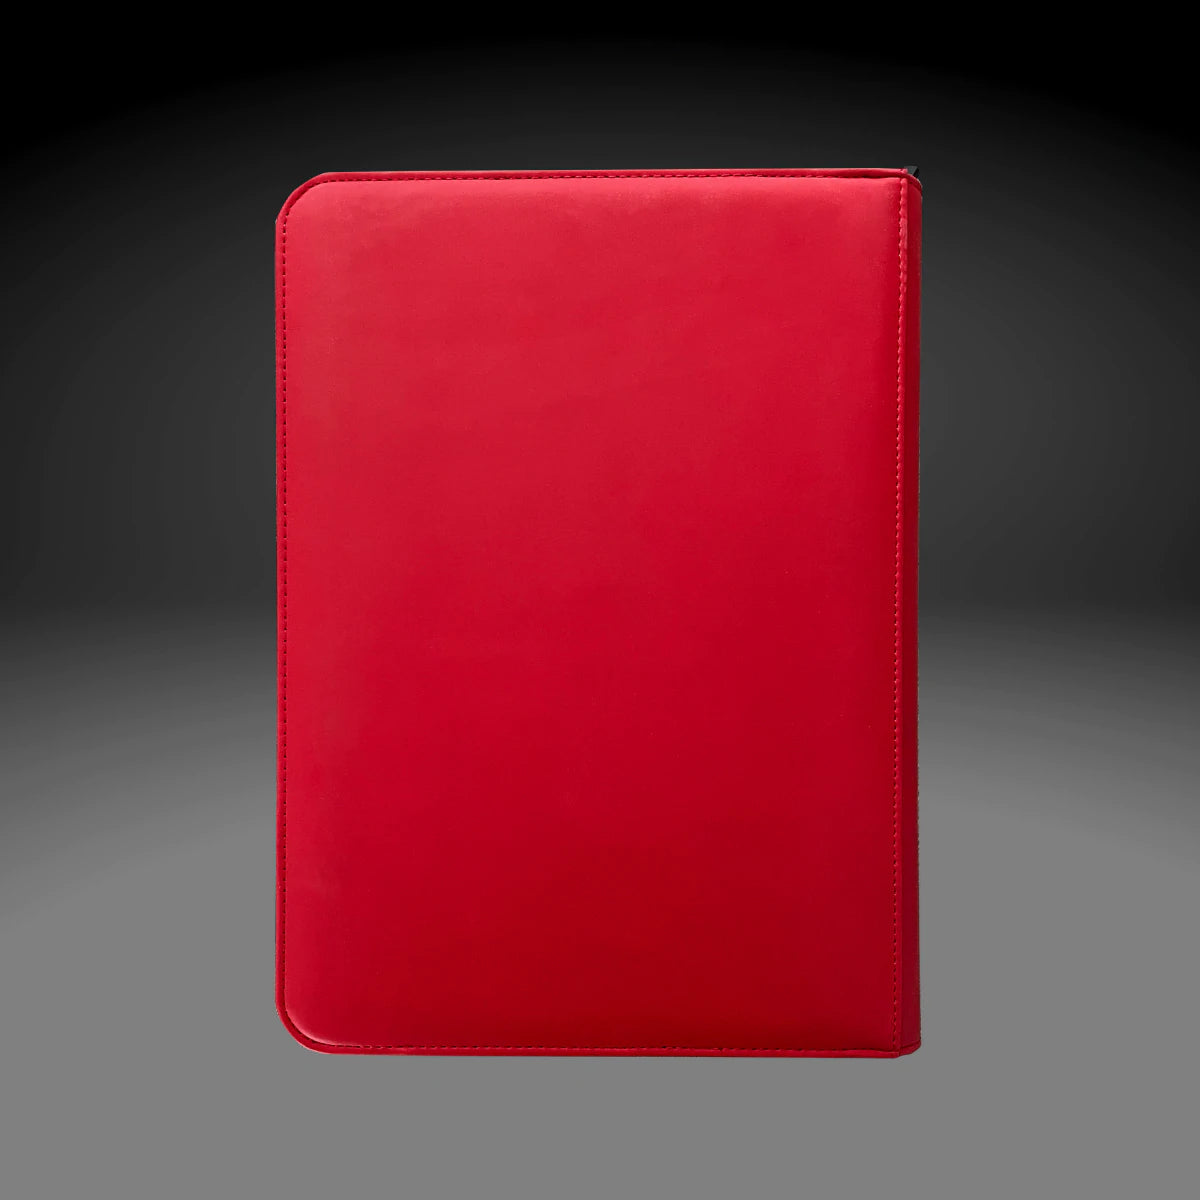 Official MetaZoo TCG Cryptid Nation Binder (Red)